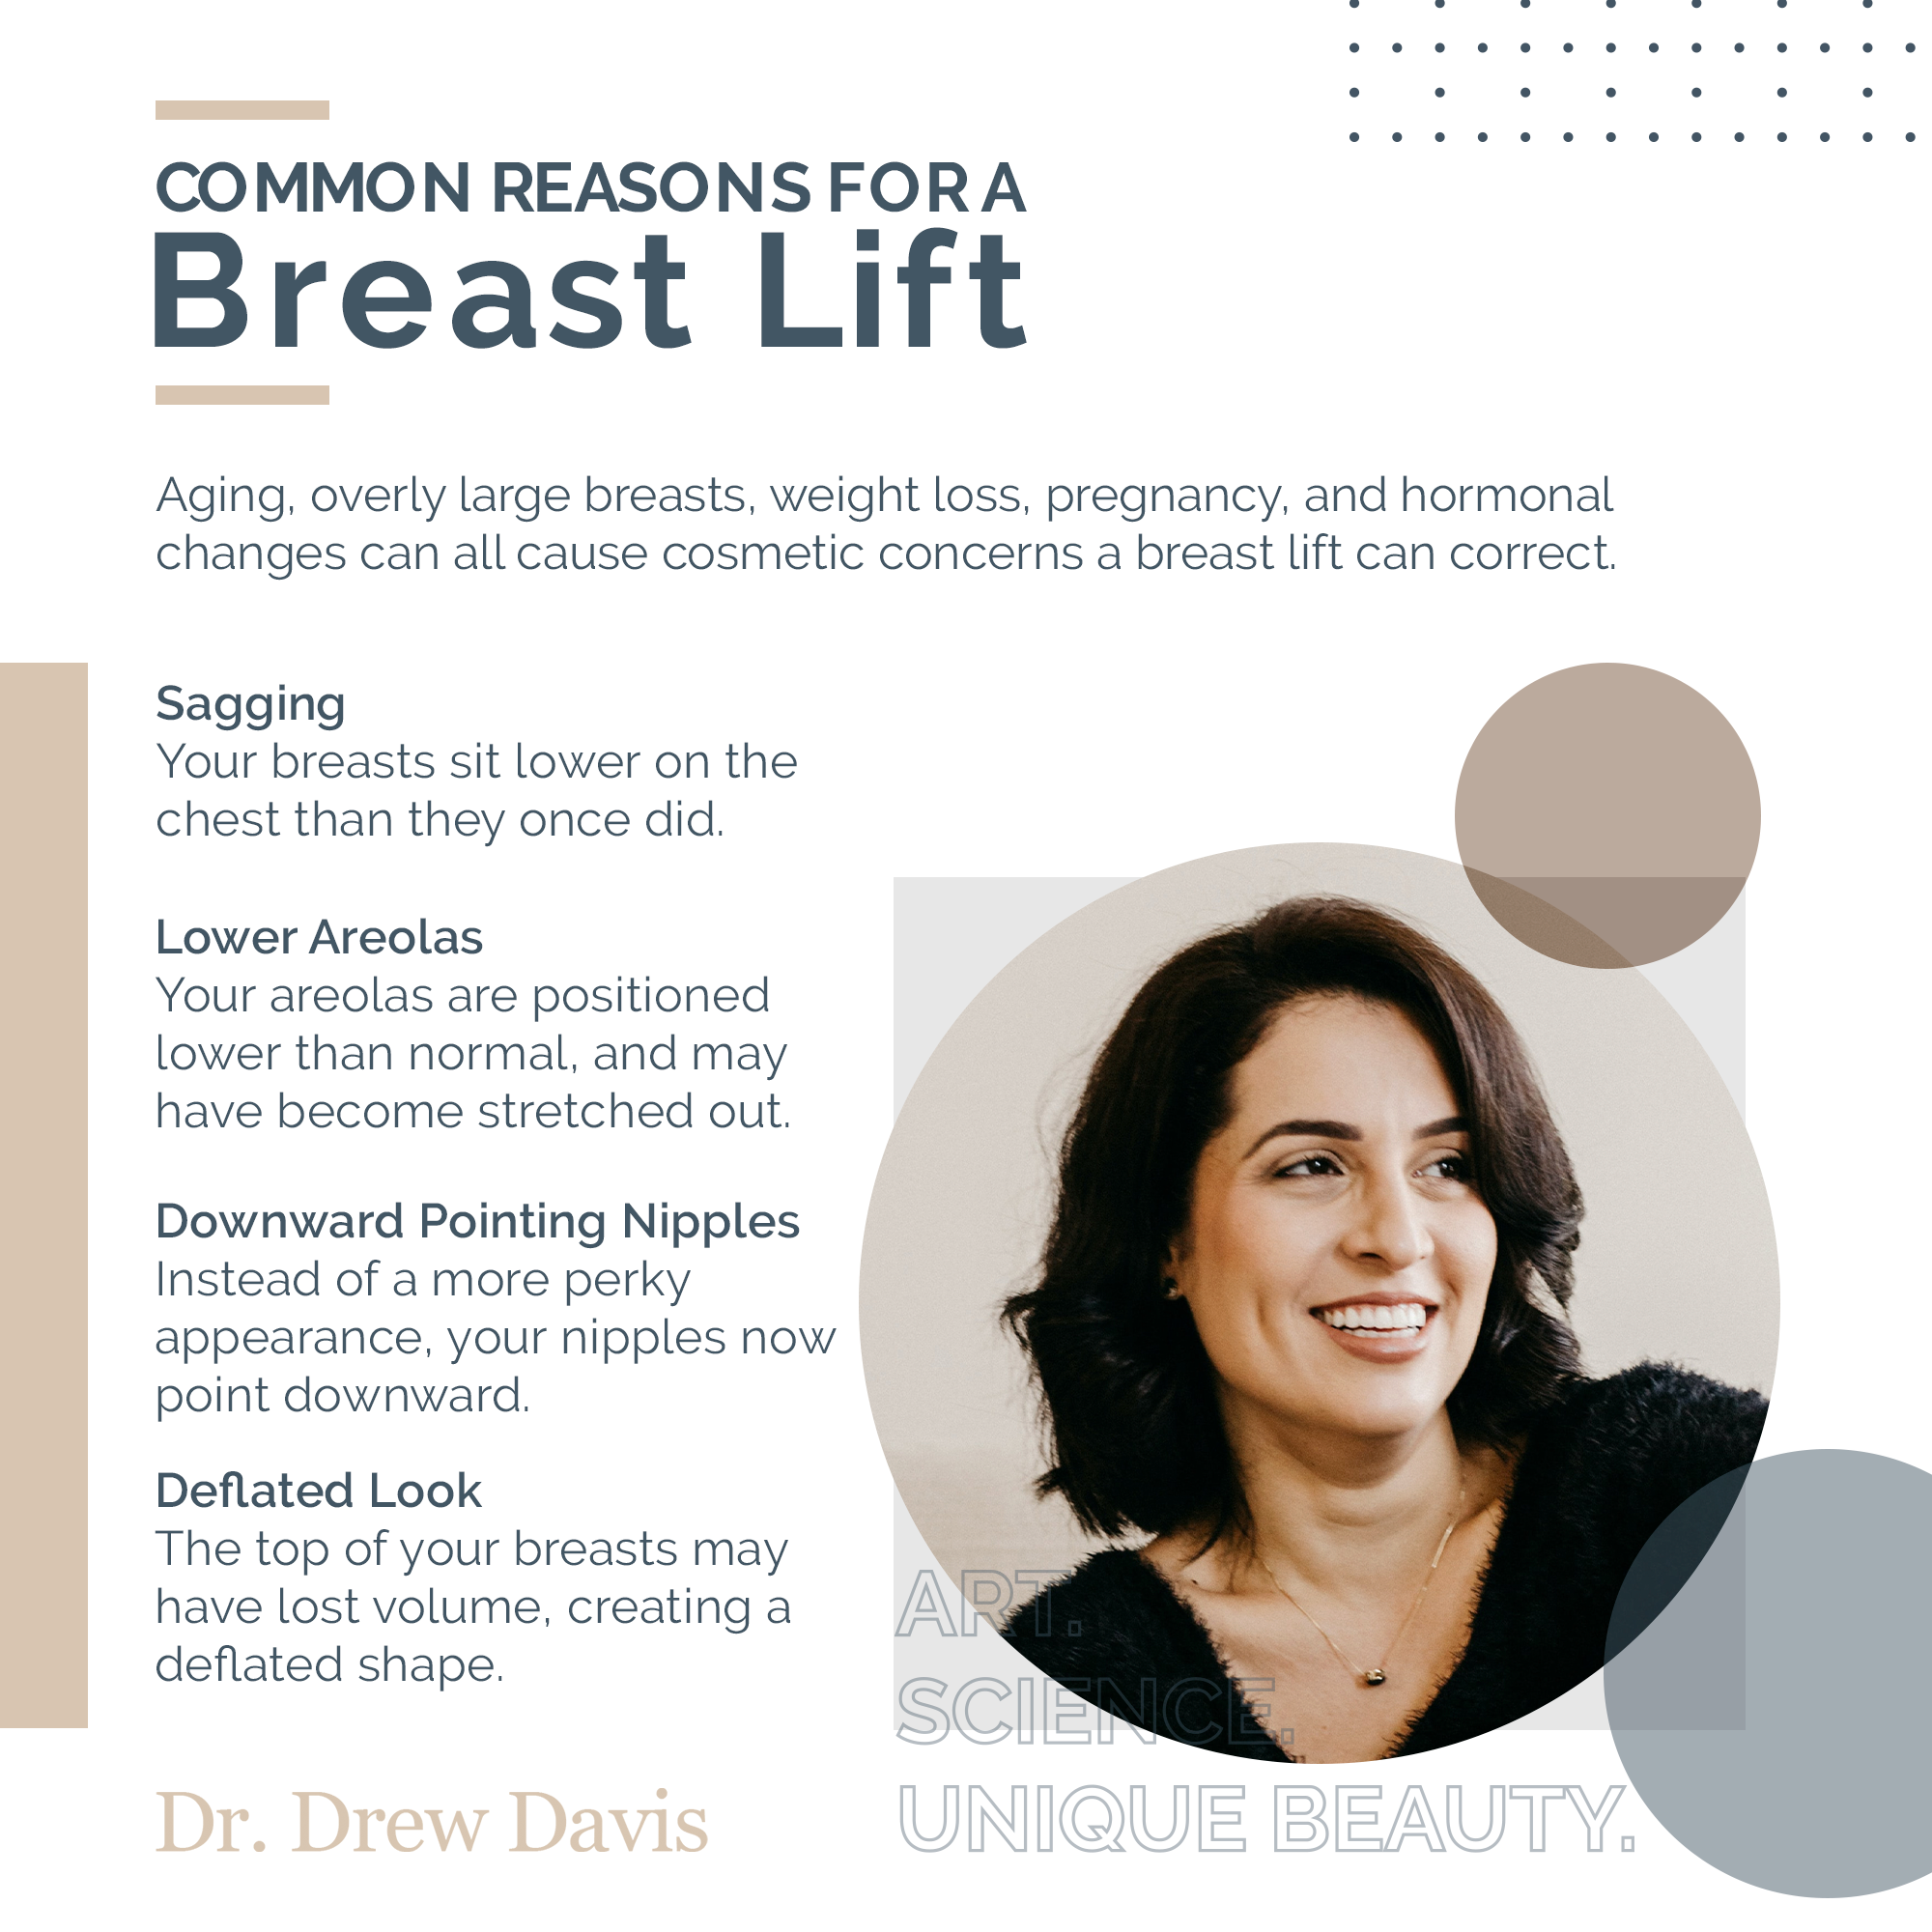 Common Reasons for a Breast Lift